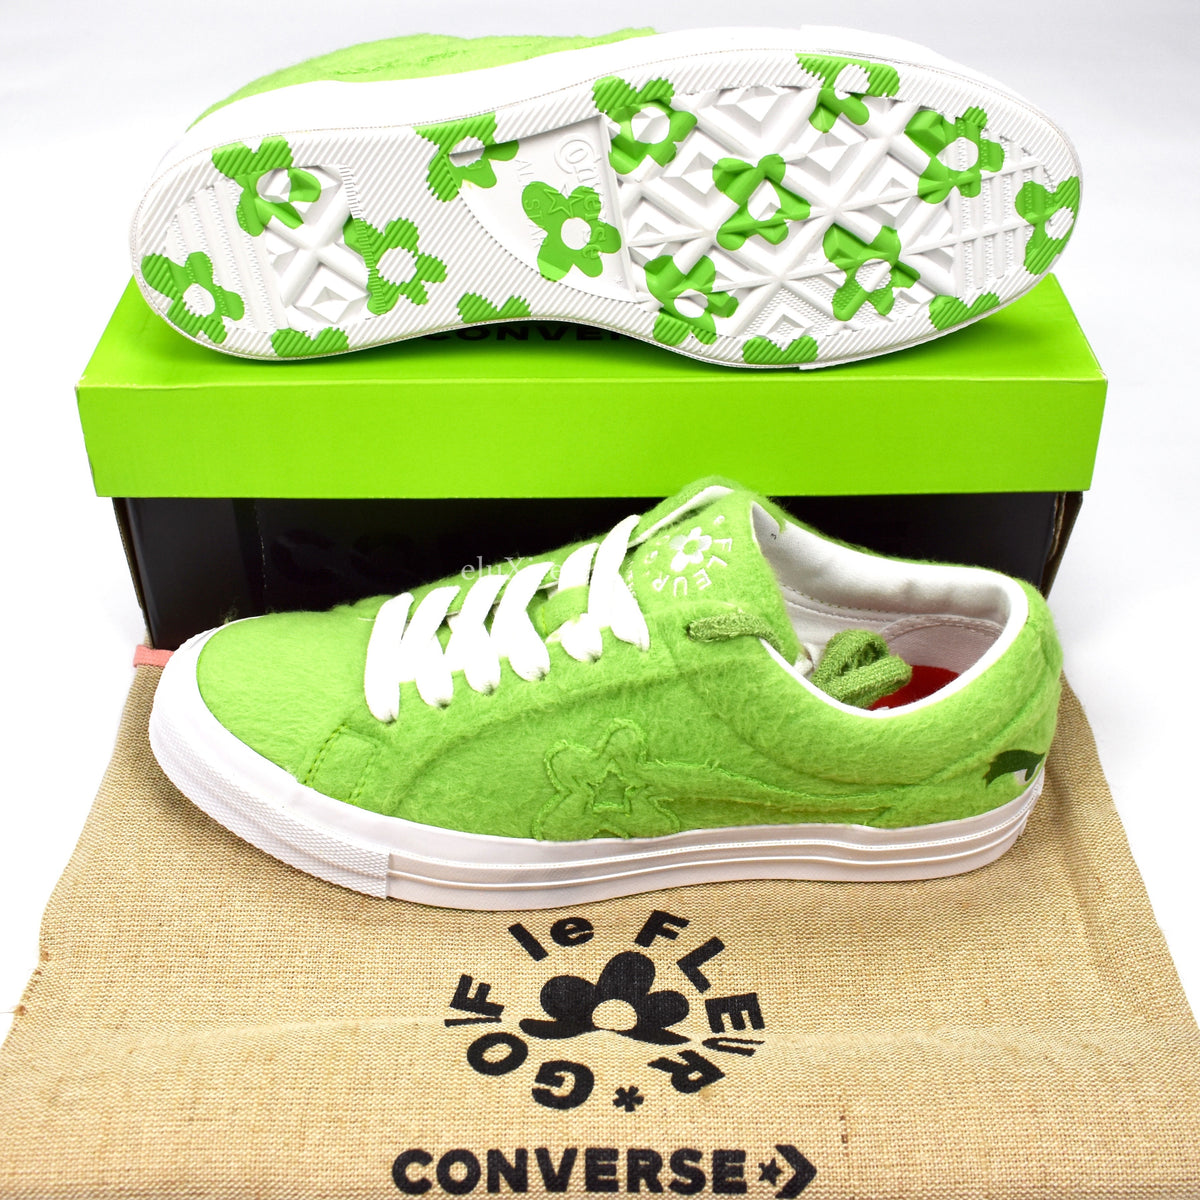 tyler grinch shoes